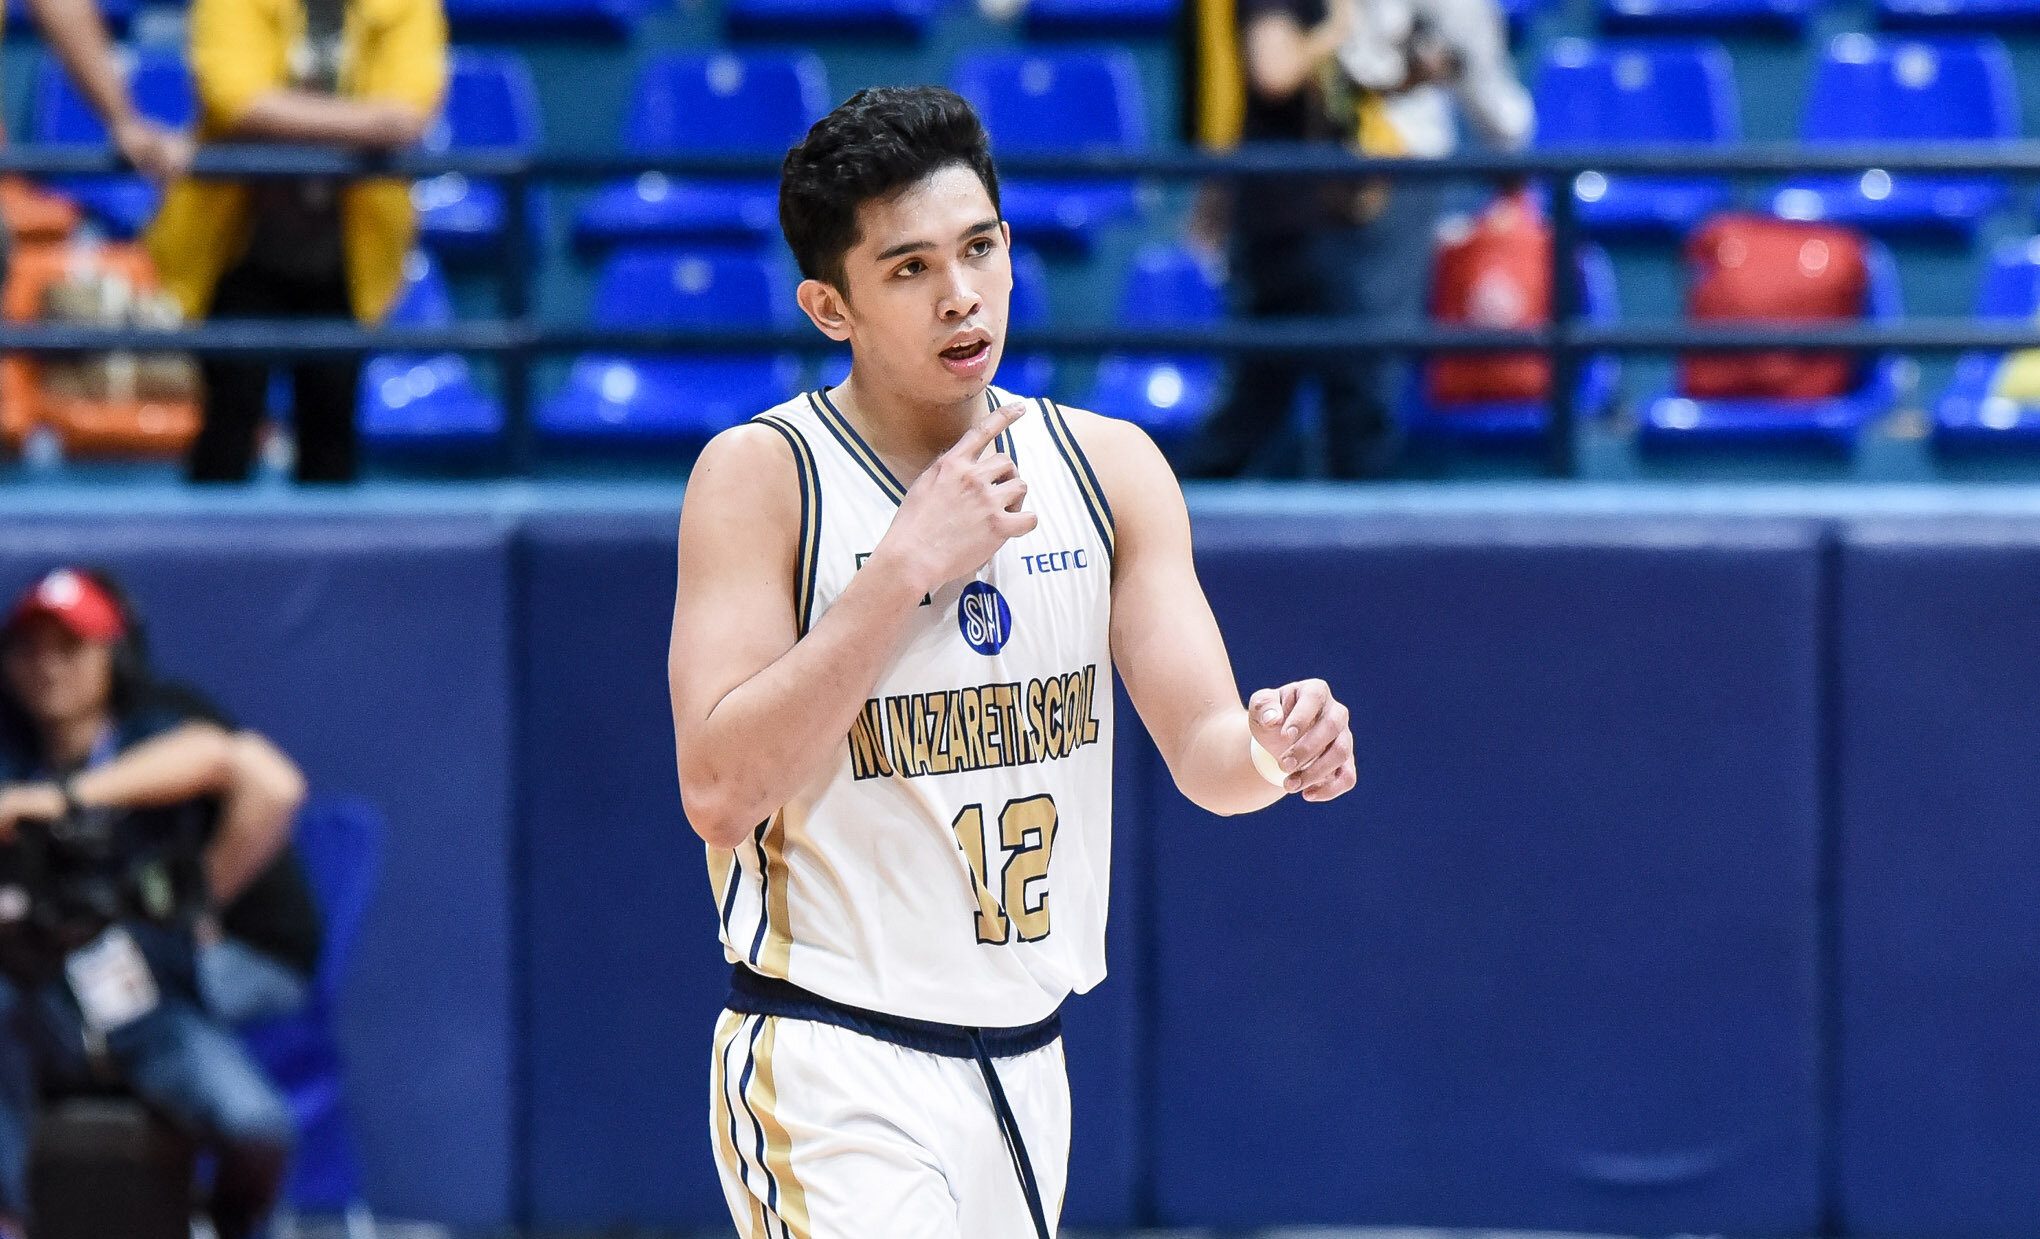 UAAP juniors MVP frontrunner Jumamoy commits to stay with NU